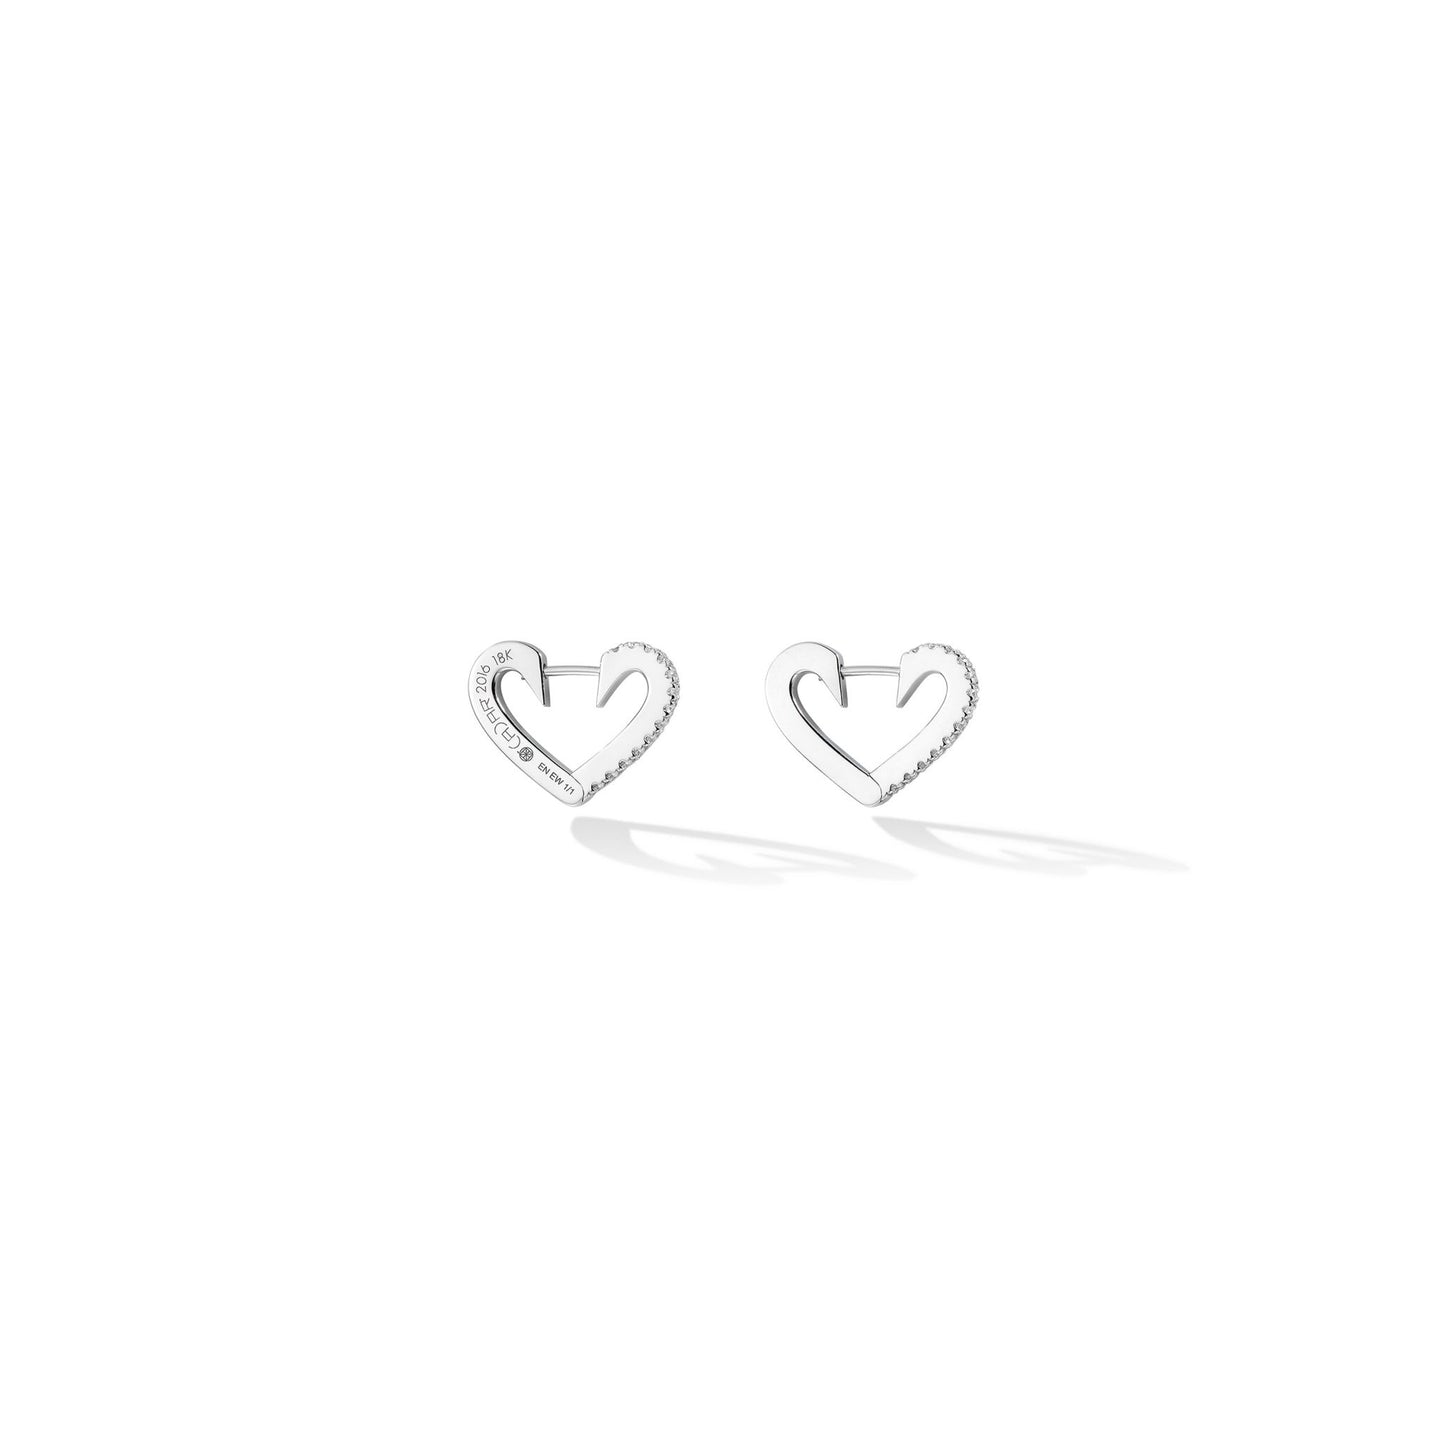 Small White Gold Endless Hoop Earrings with White Diamonds - Cadar